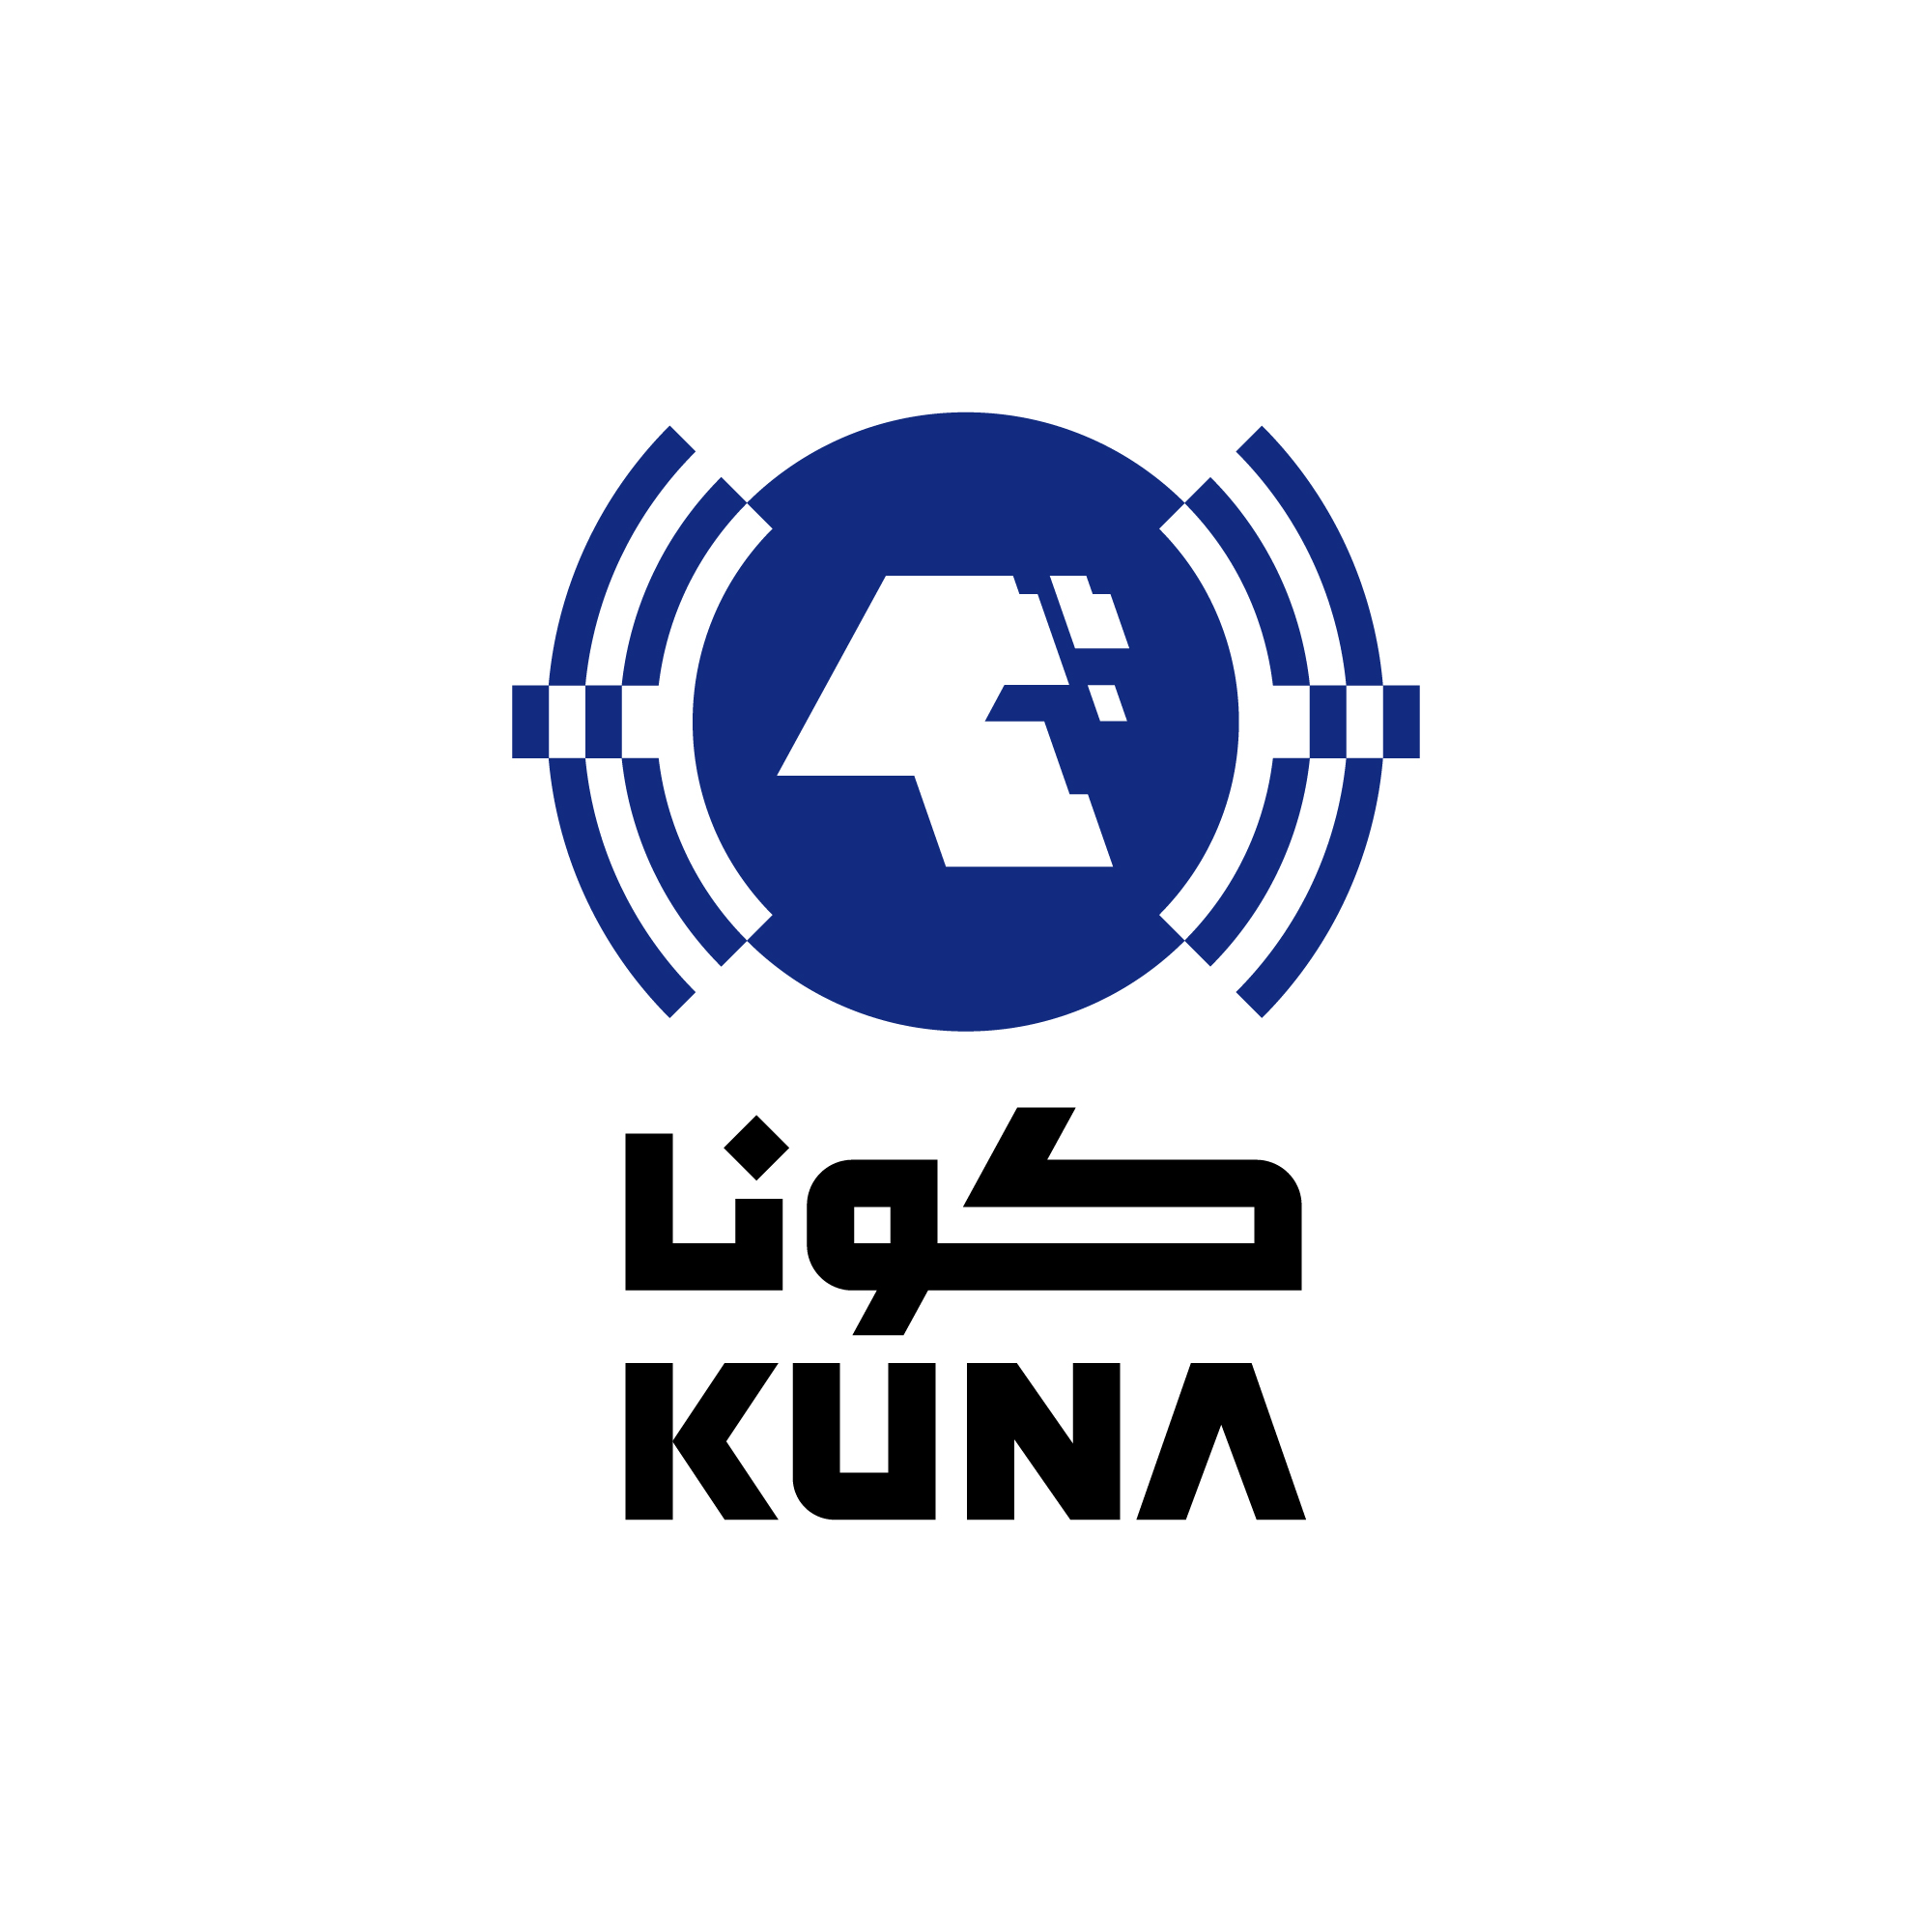 Briefing of KUNA main news for Thursday until 00:00 GMT